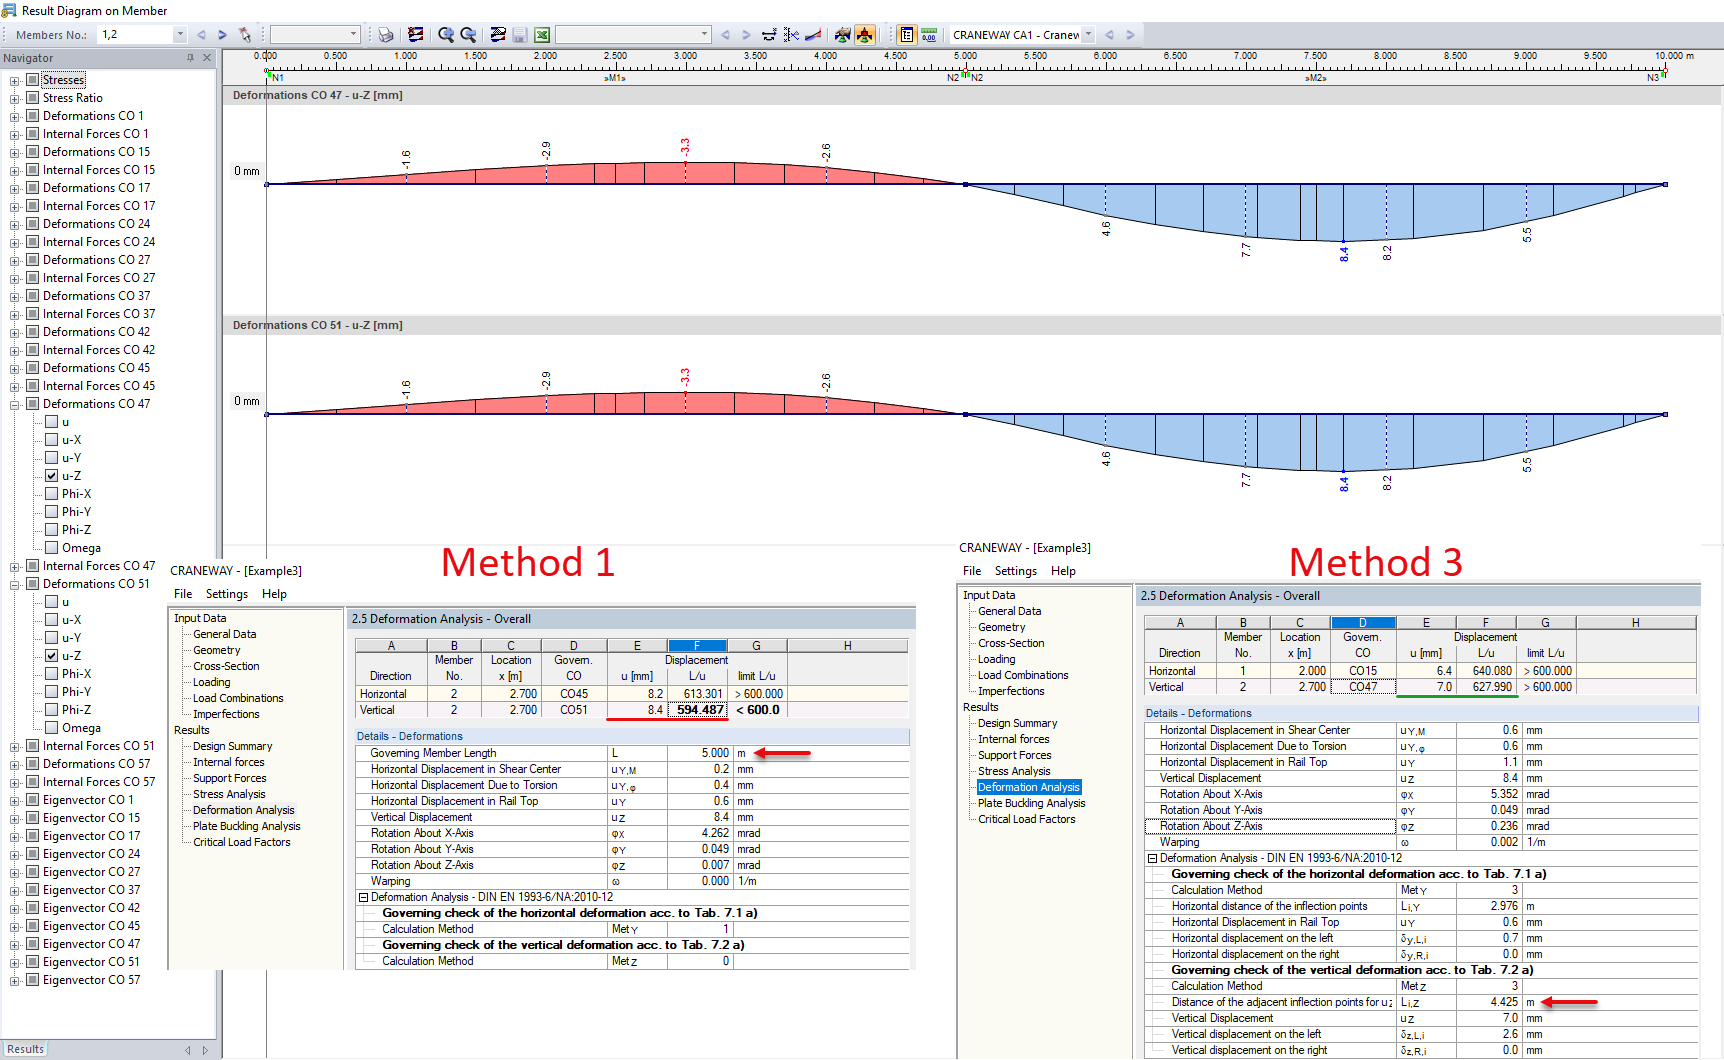 Comparing Results According to Method 1 and Method 3